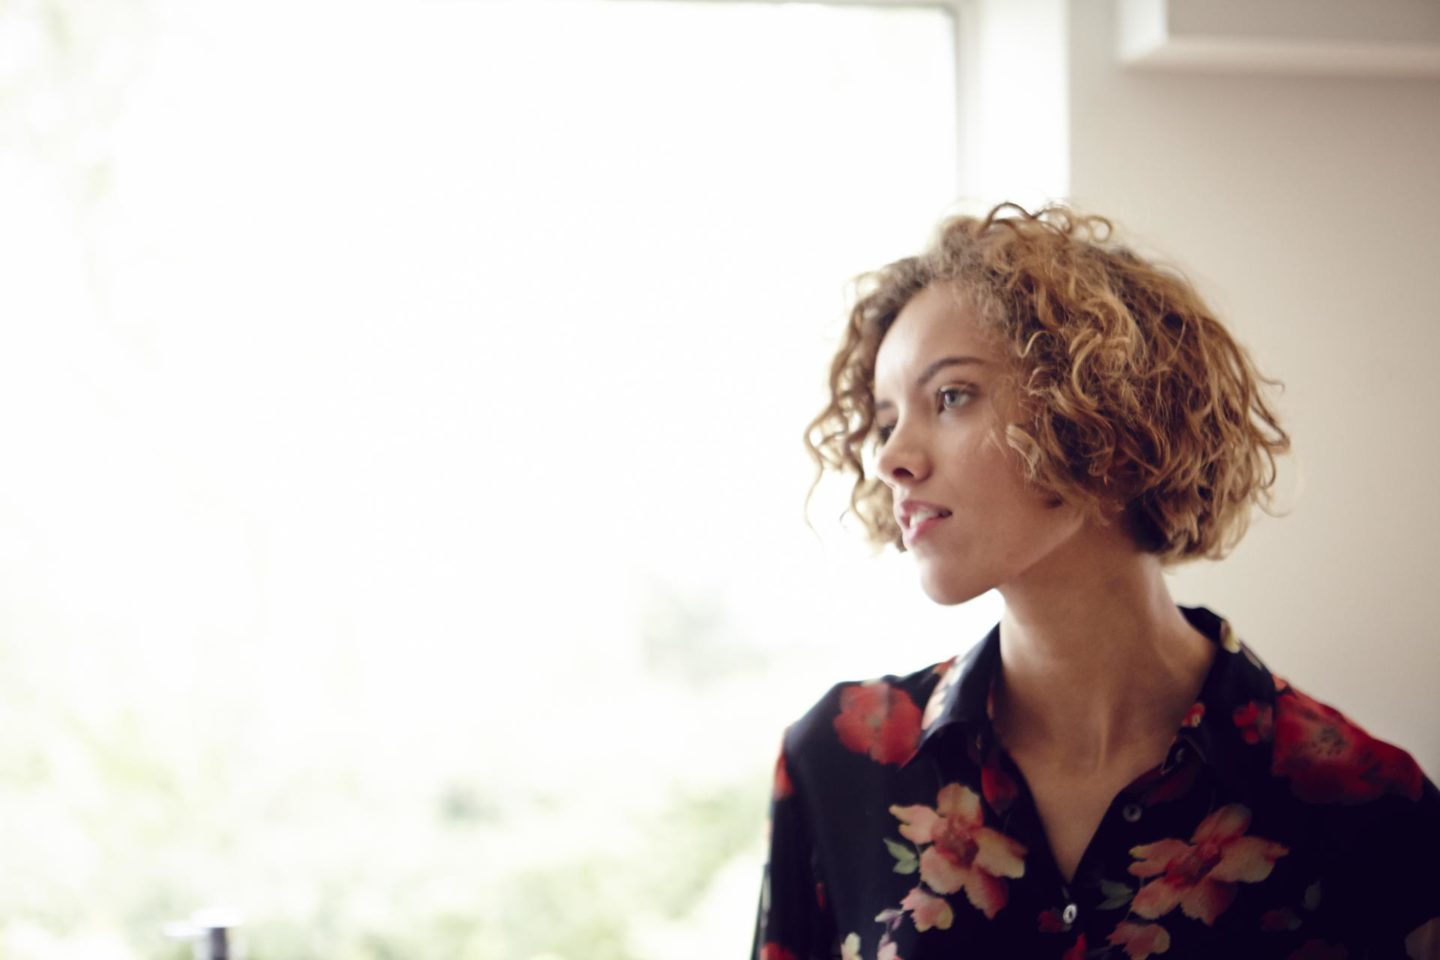 RUBY TANDOH ON RECOVERY, DEPRESSION & COFFEE ICE CREAM CRAVINGS